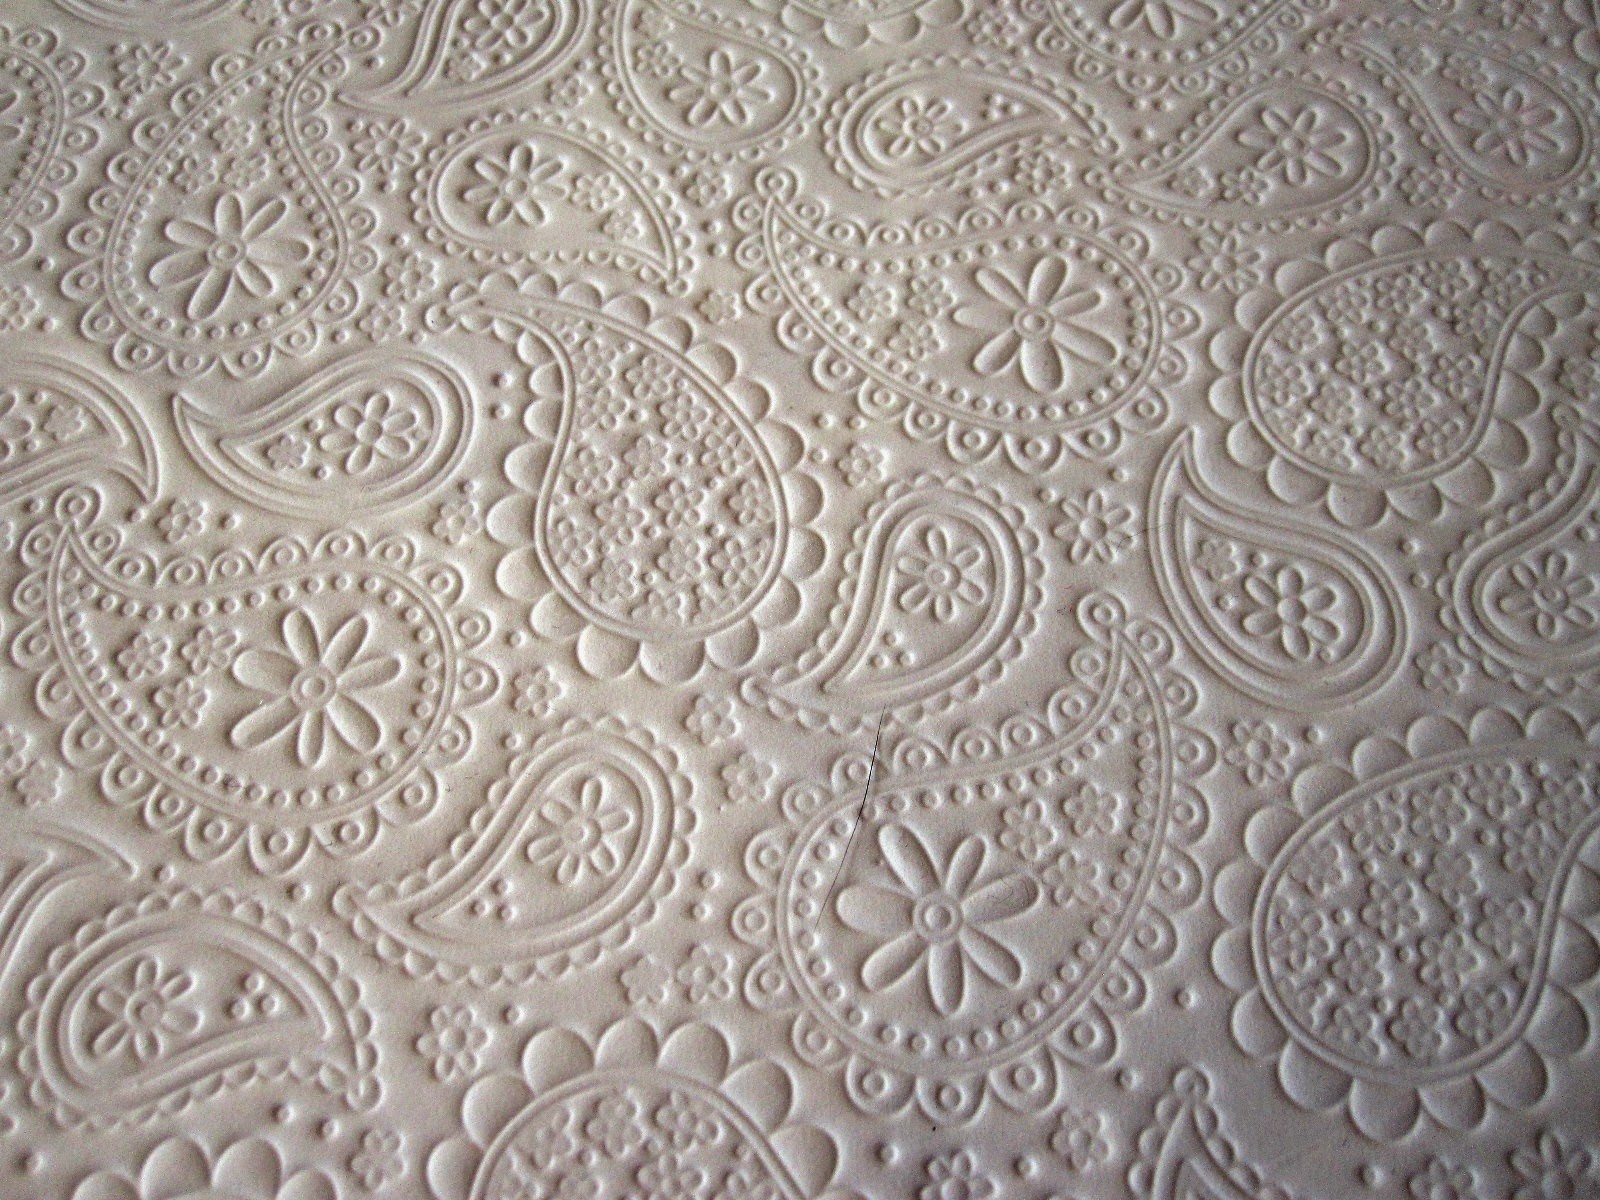 Scrapbooking paper embossed with a paisley and daisy pattern.